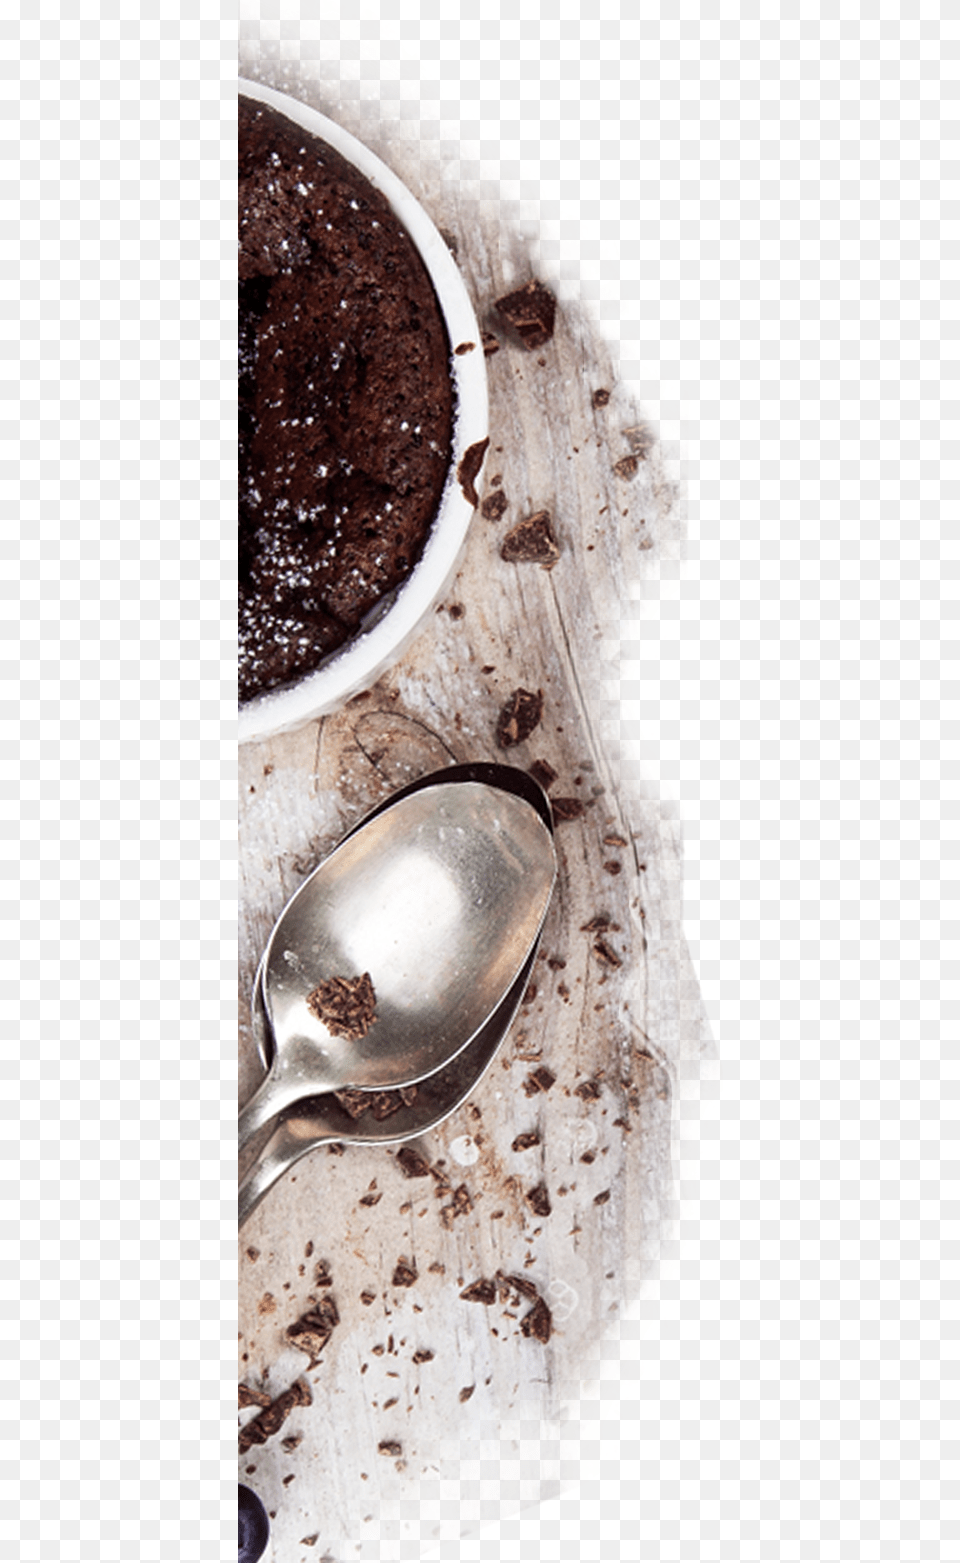 Chocolate, Cutlery, Spoon, Cup, Dessert Png Image